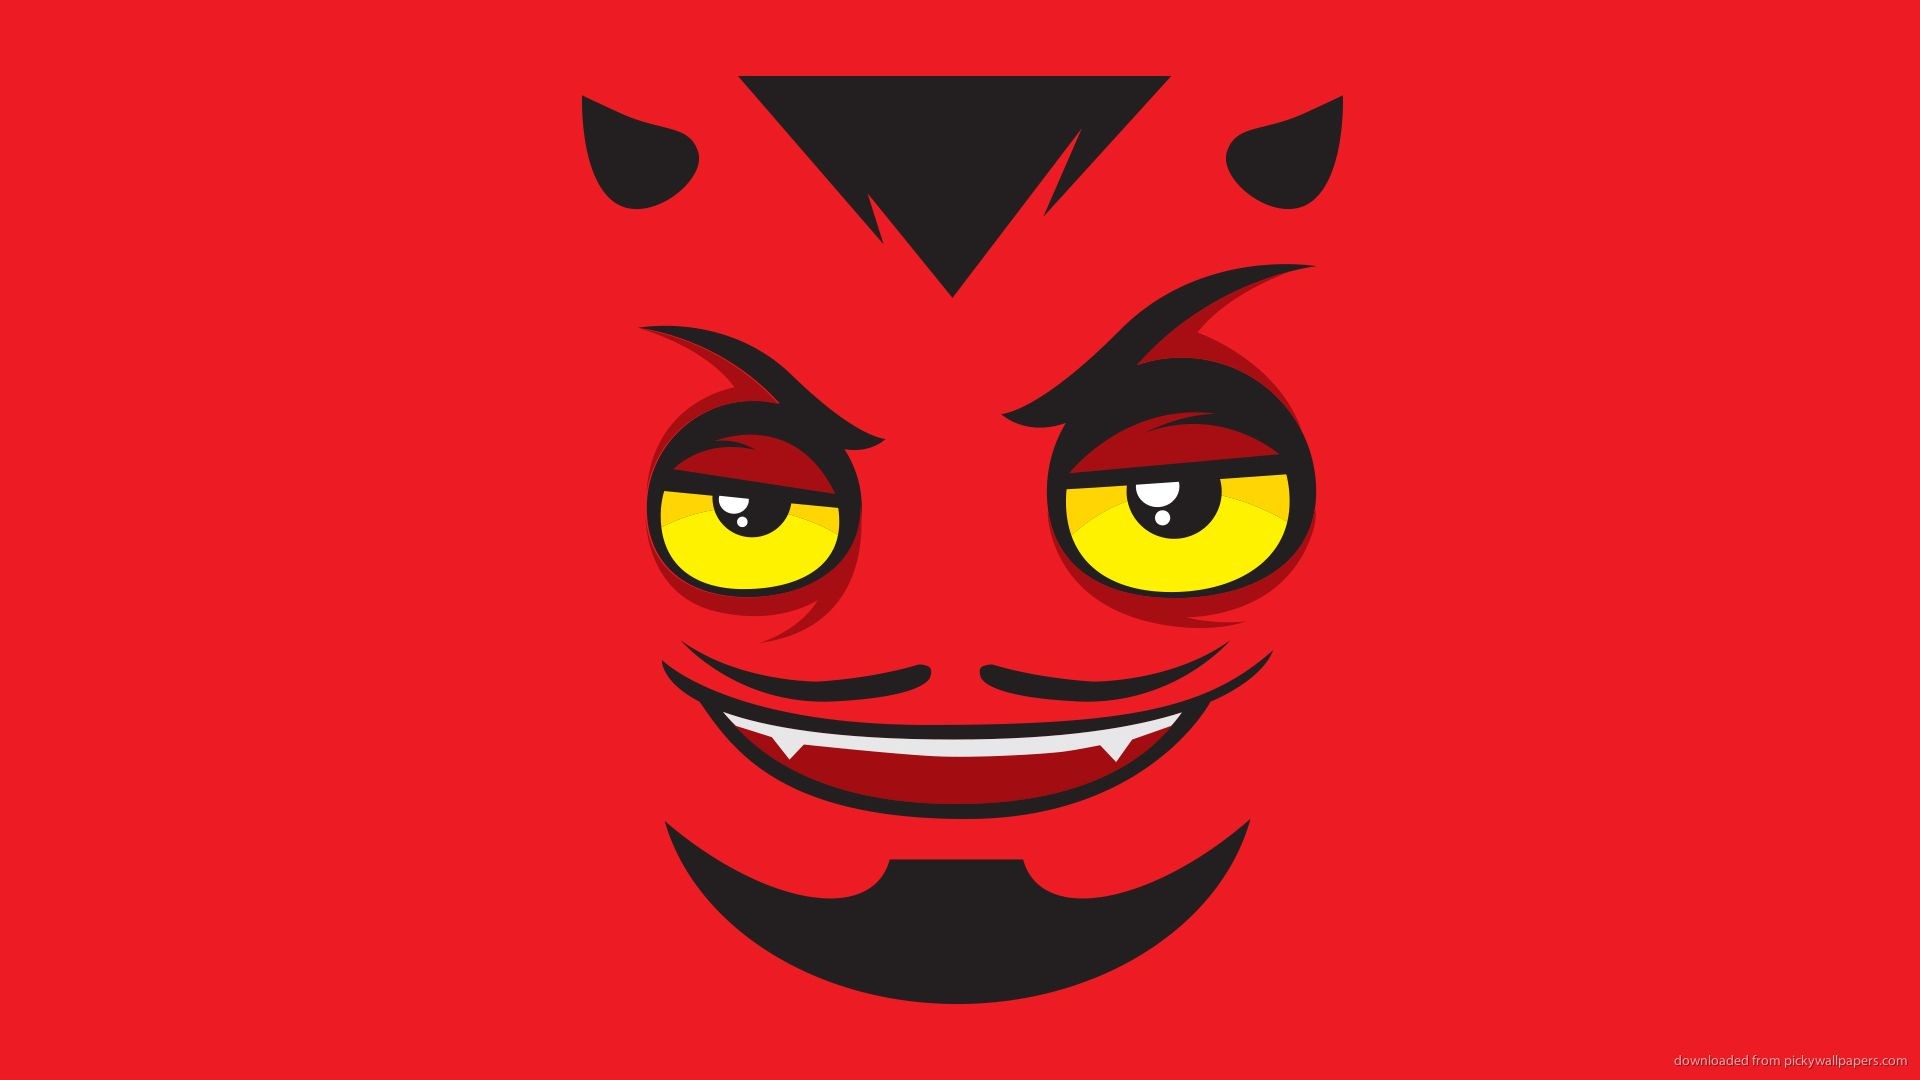 1920x1080 Devils Smile Wallpaper For iPhone 4